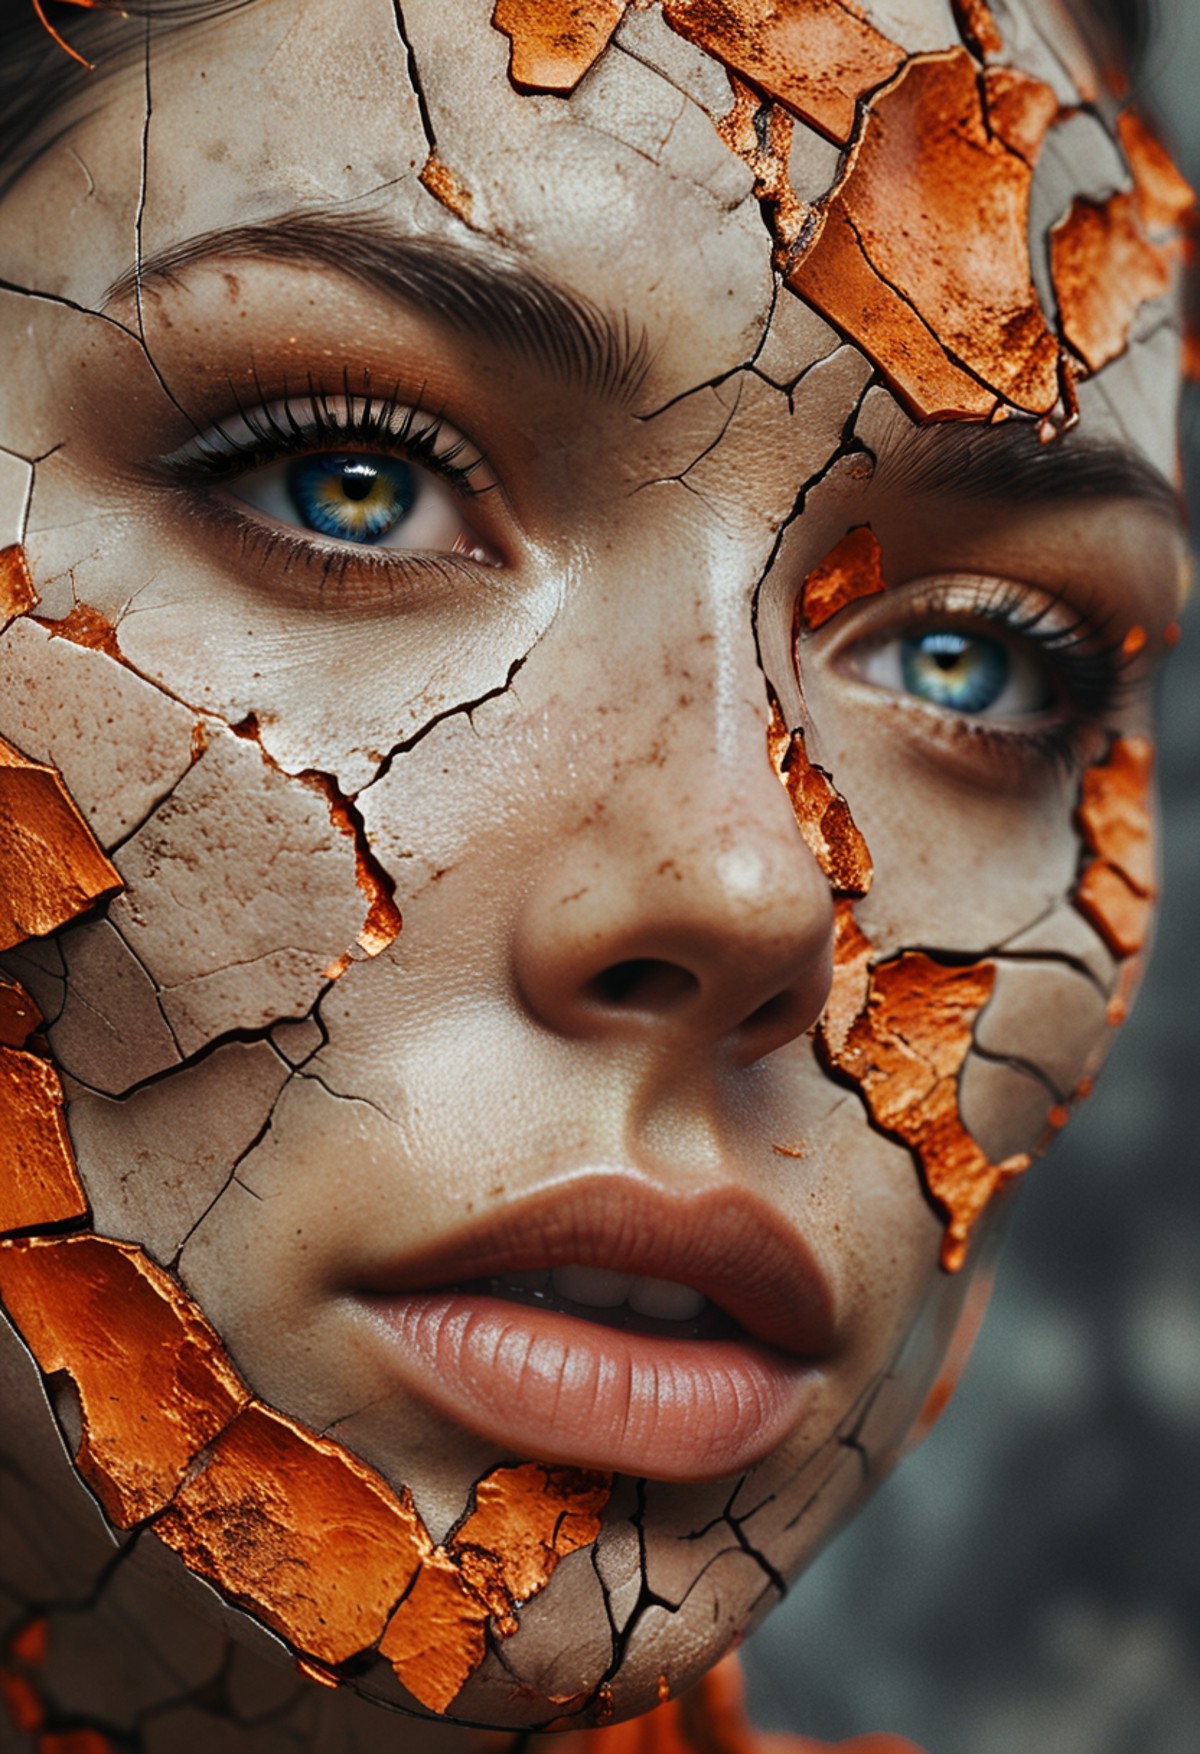 a close up of a person's face on a cracked surface, inspired by Alberto Seveso, featured on zbrush central, portrait of an...